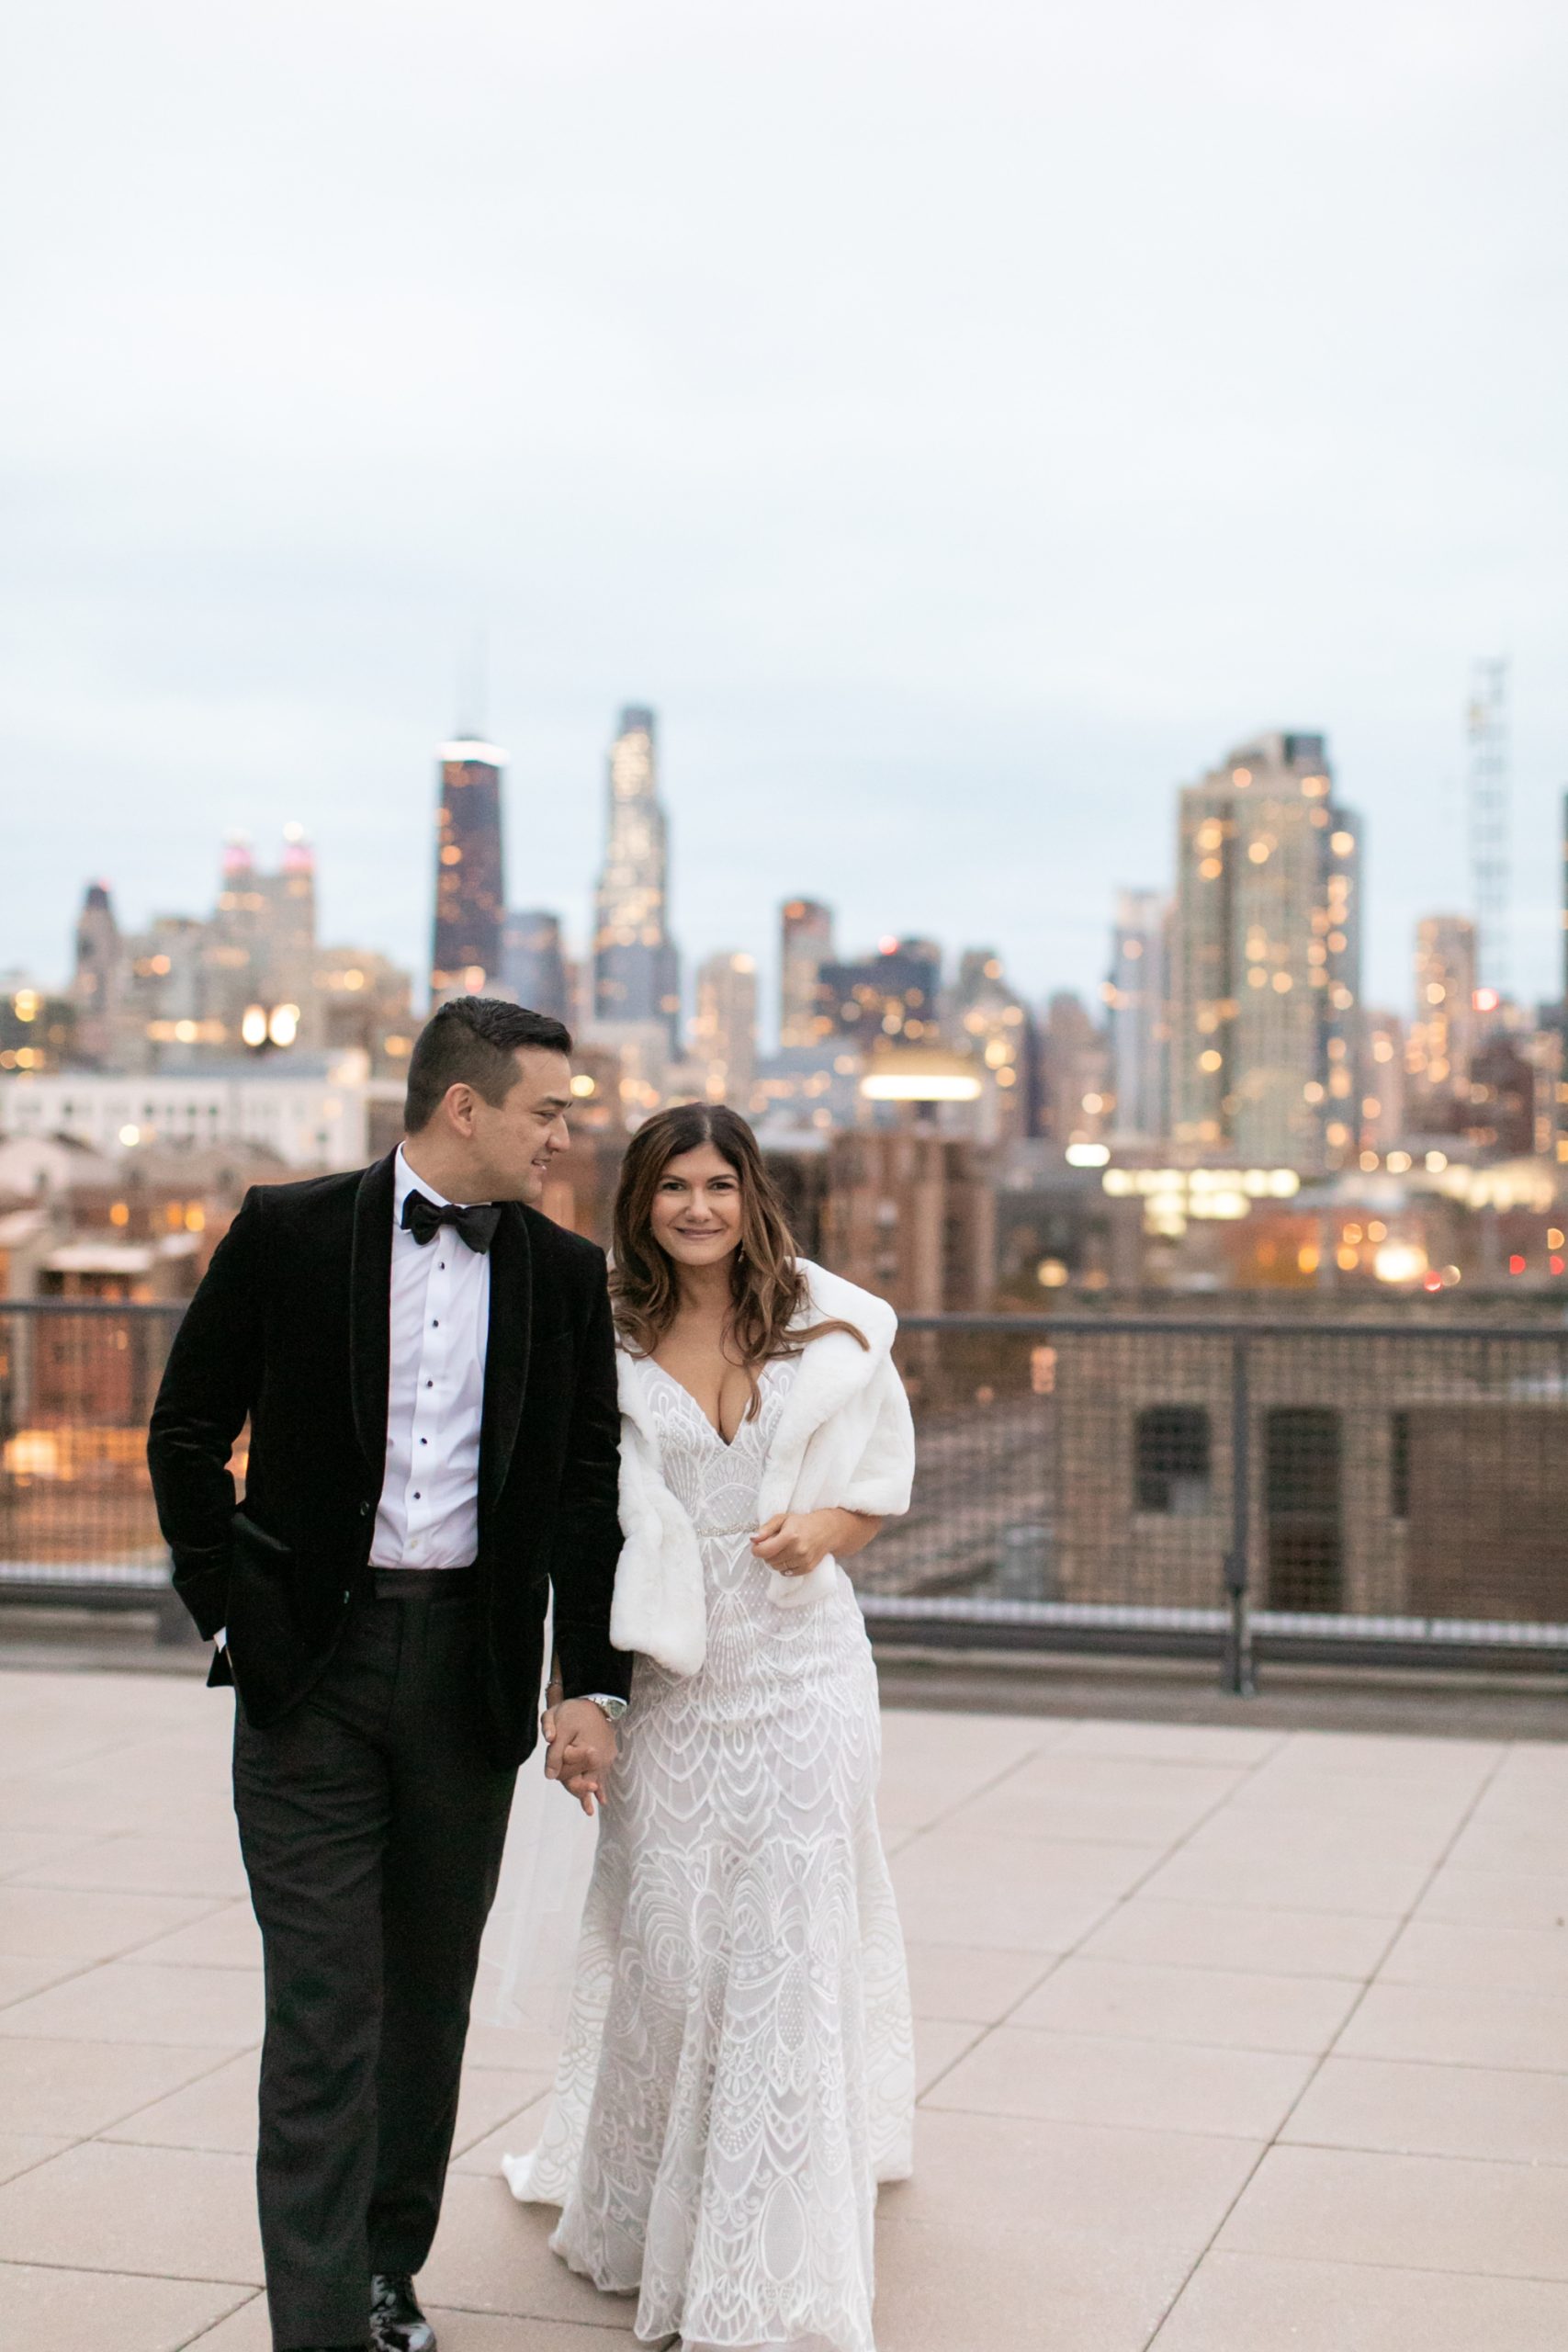 the bride and groom posed for rooftop wedding photos